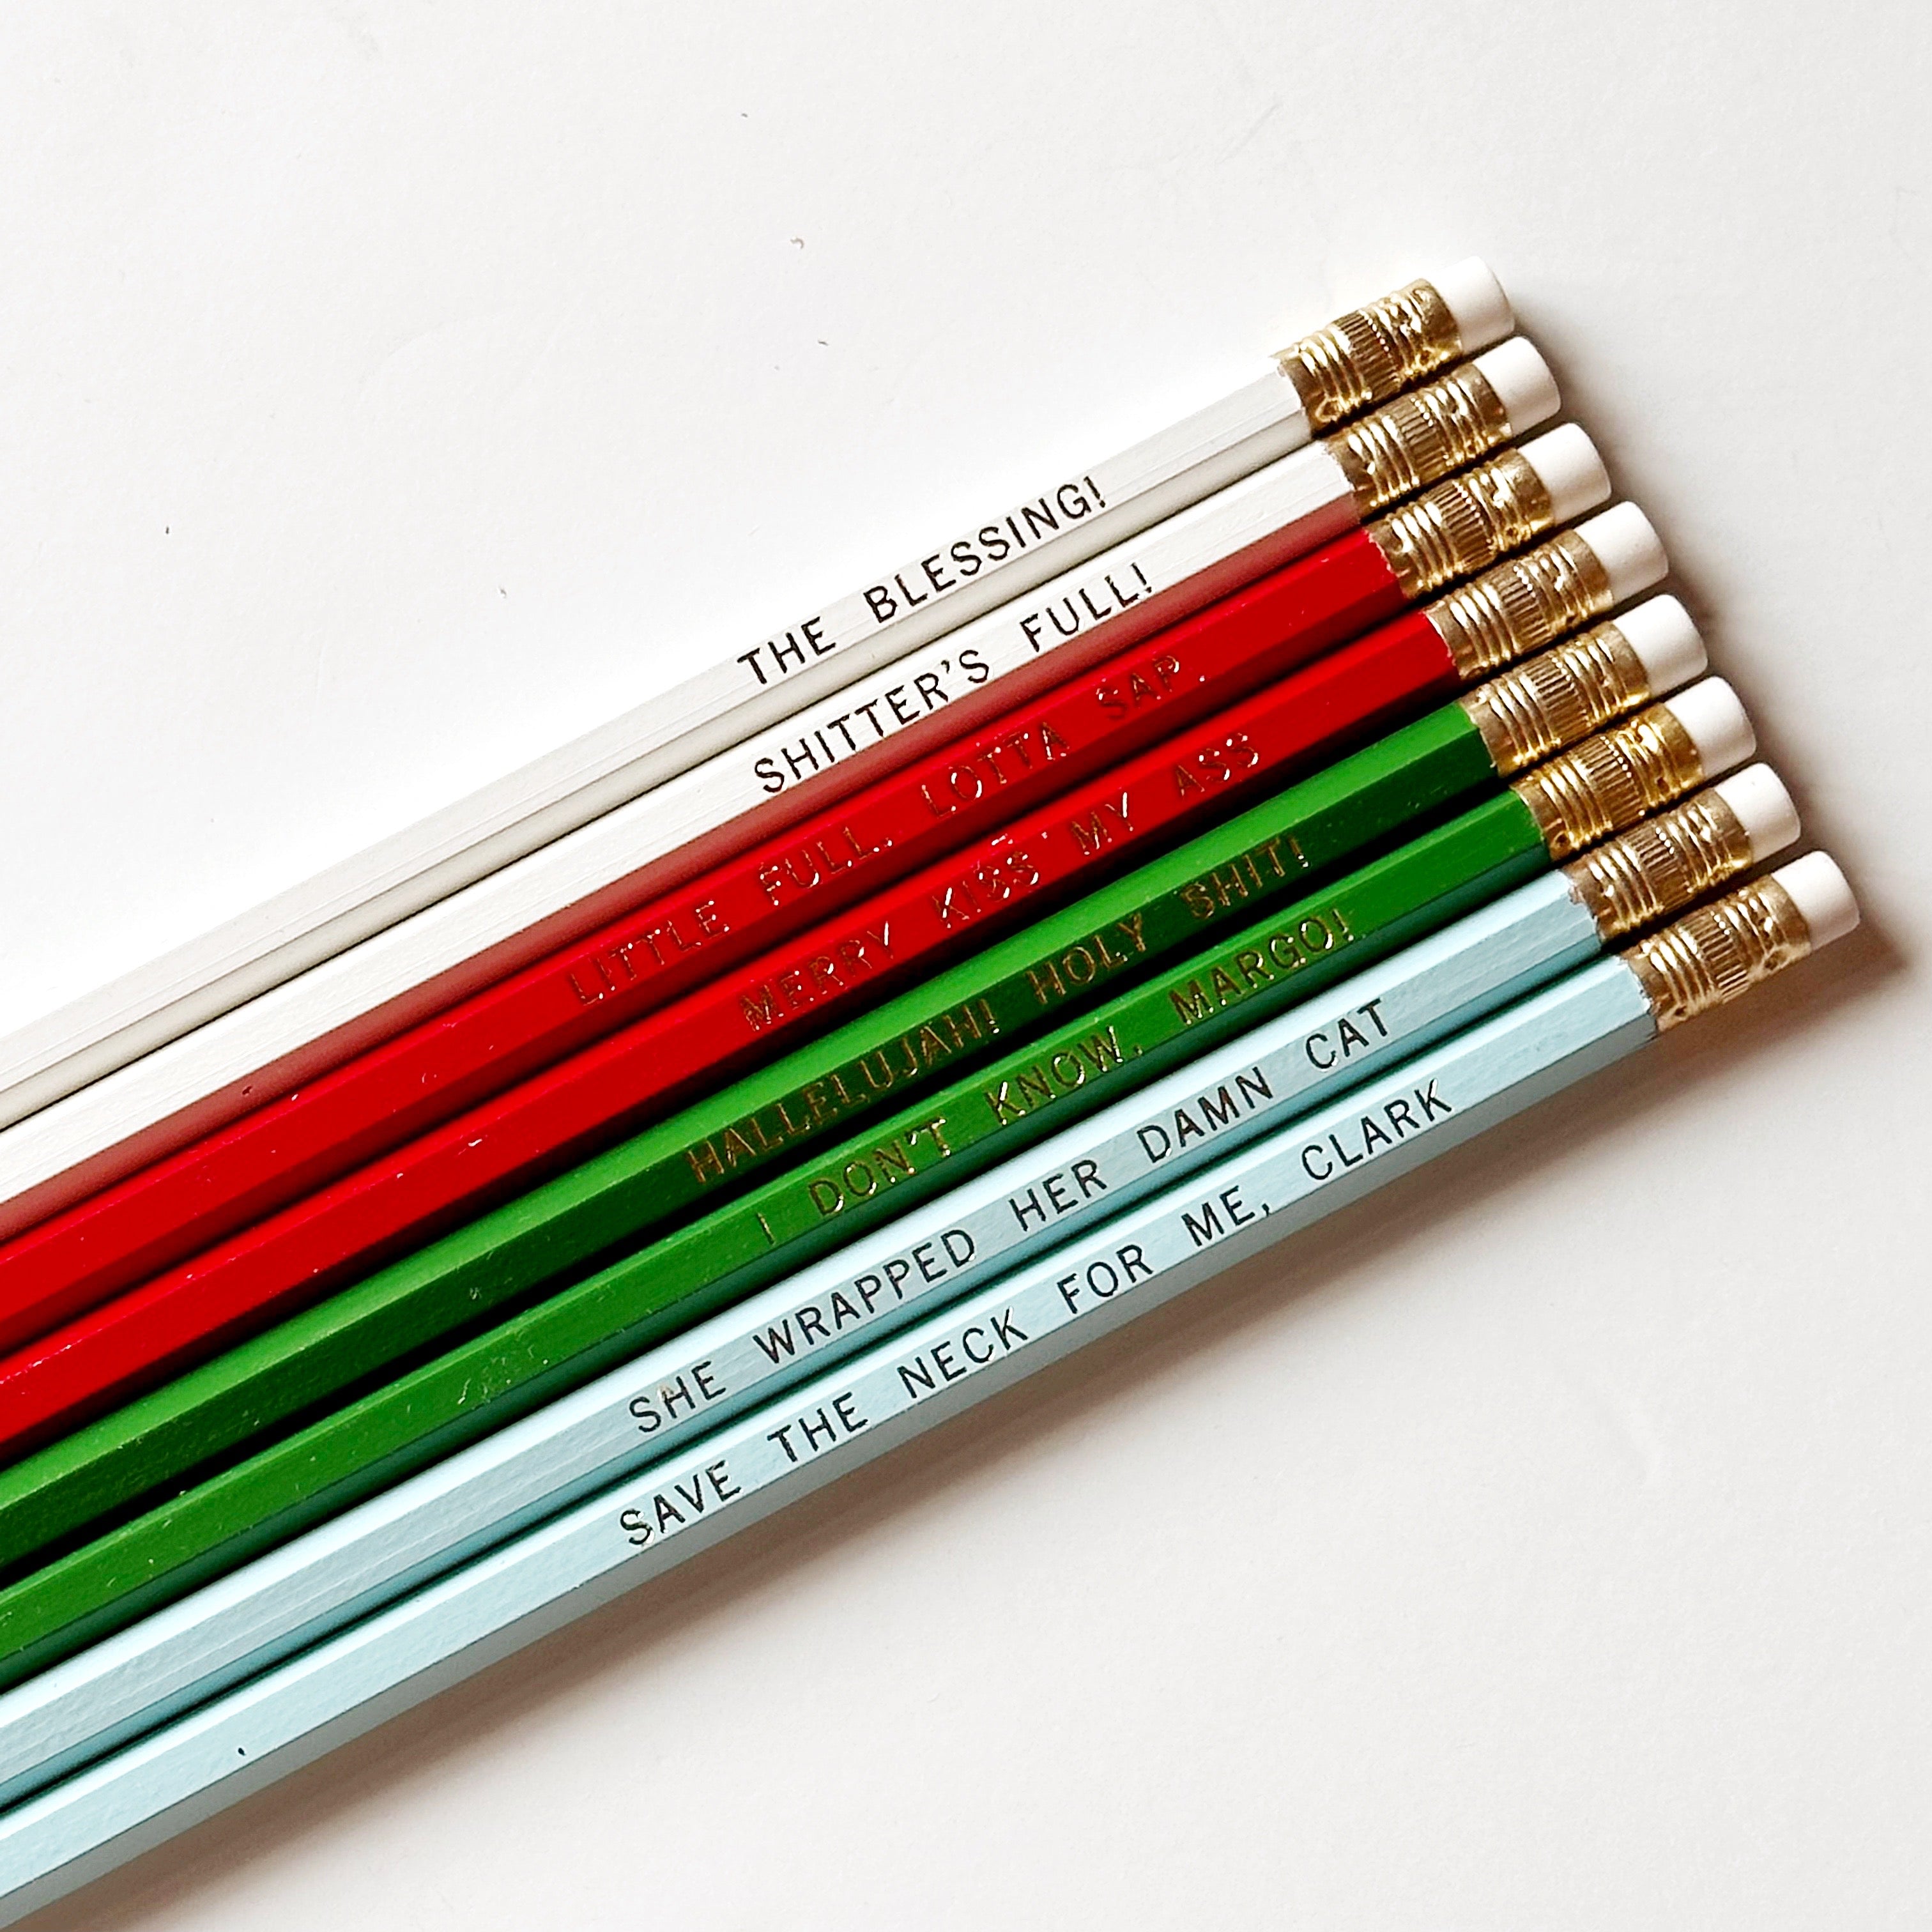 Eight pencils with gold foil text says, "Merry Kiss My Ass Little Full. Lotta Sap. The Blessing! Shitter's Full! Hallelujah! Holy Shit! I Don't Know, Margo! She Wrapped Her Damn Cat Save The Neck For Me, Clark". 